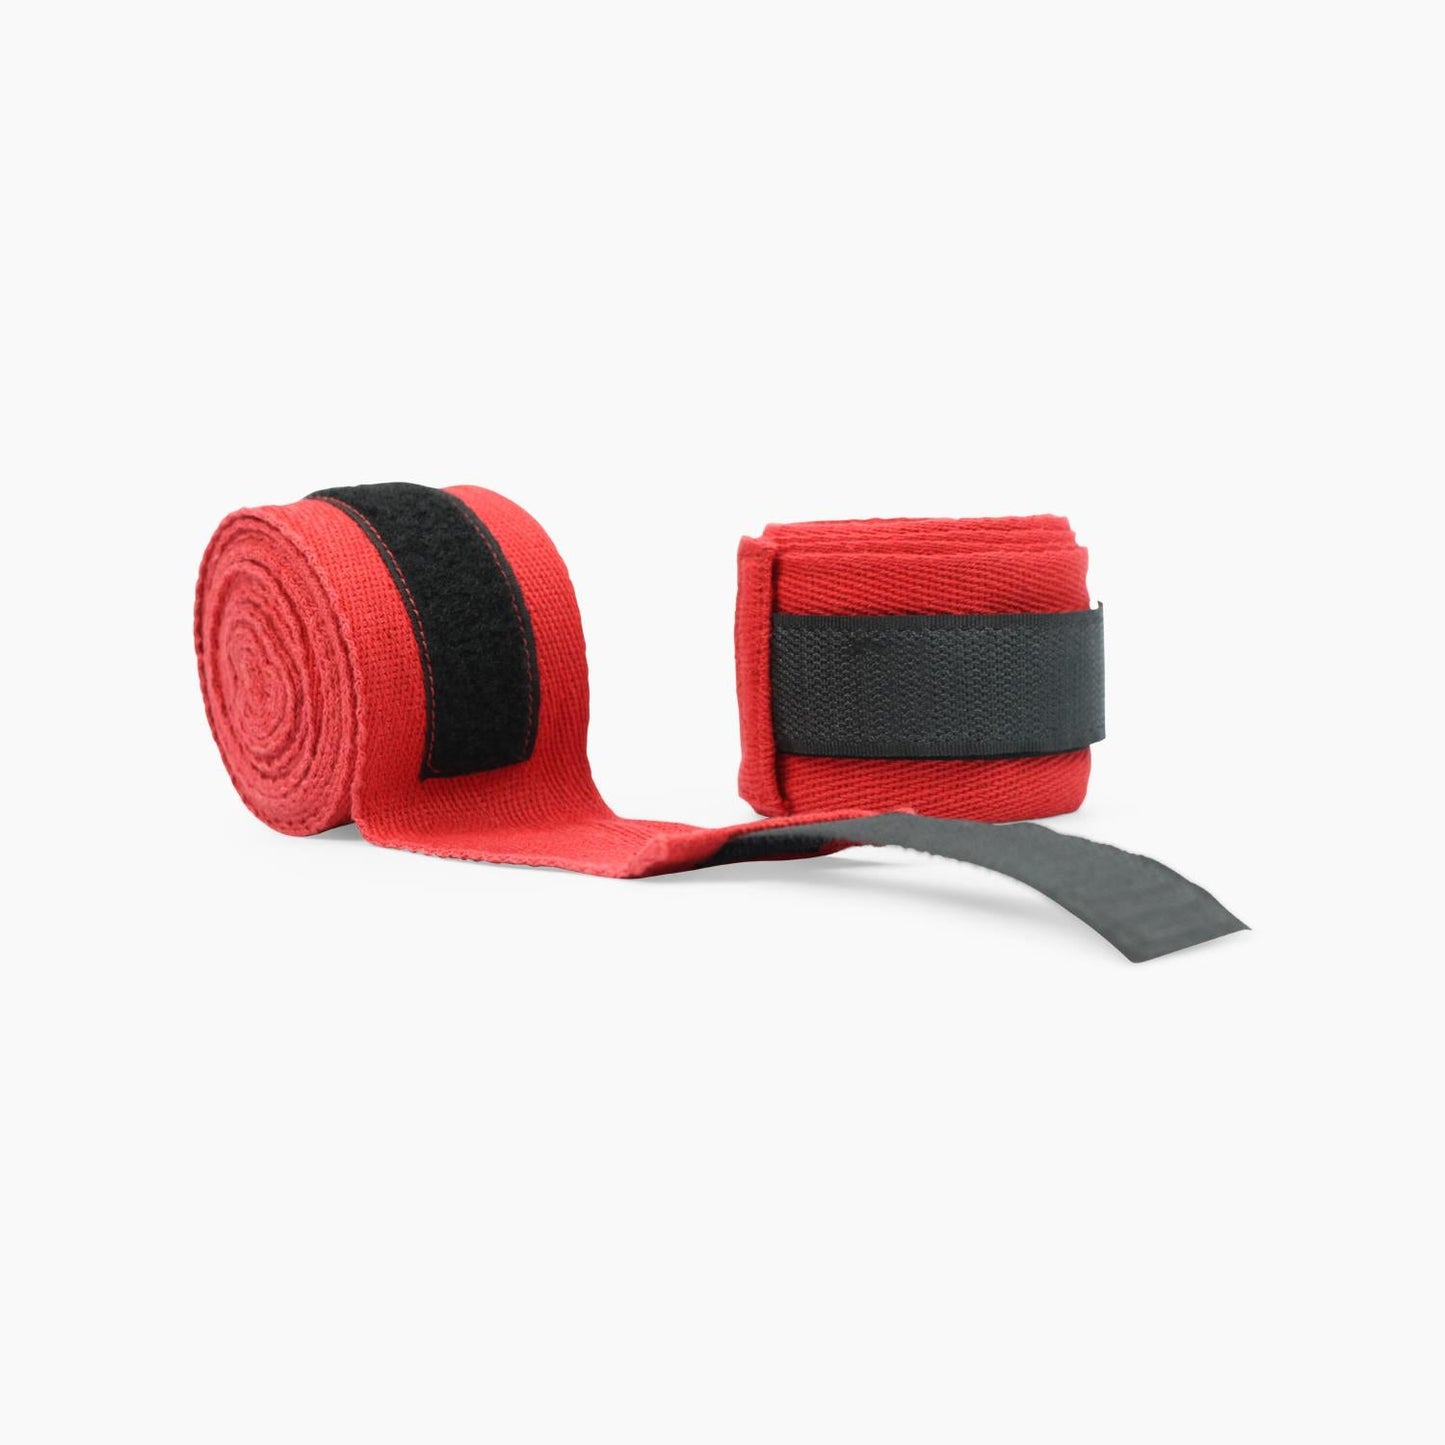 Buy Splay Hand Wraps-Hand Wraps-Splay (UK) Limited-Red-170 Inch-Splay UK Online